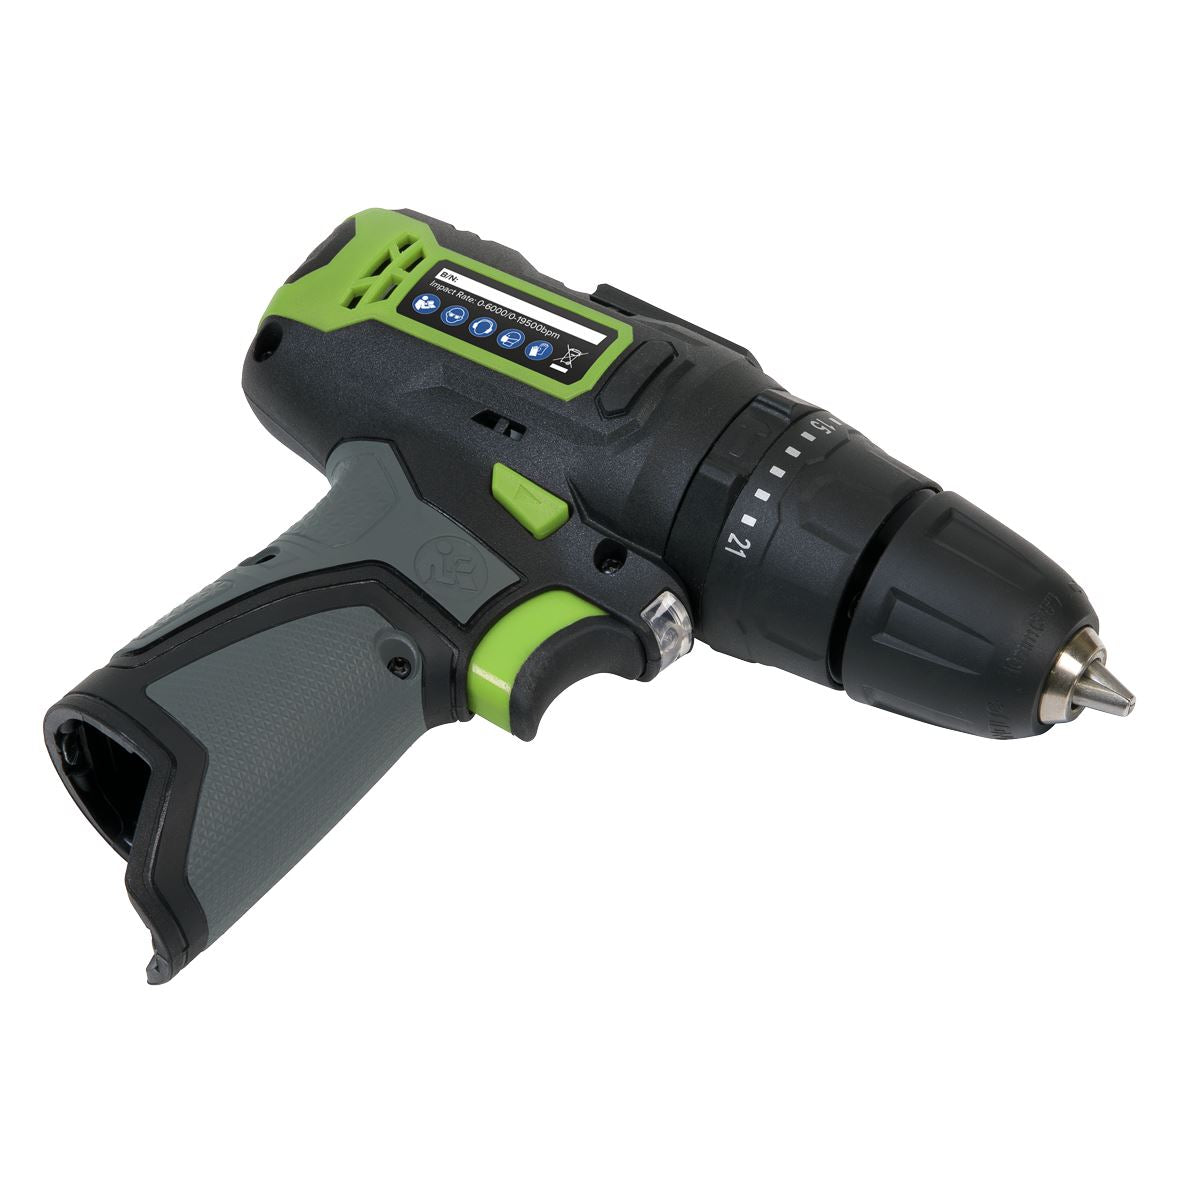 Sealey Cordless Combi Drill Ø10mm 10.8V SV10.8 Series - Body Only